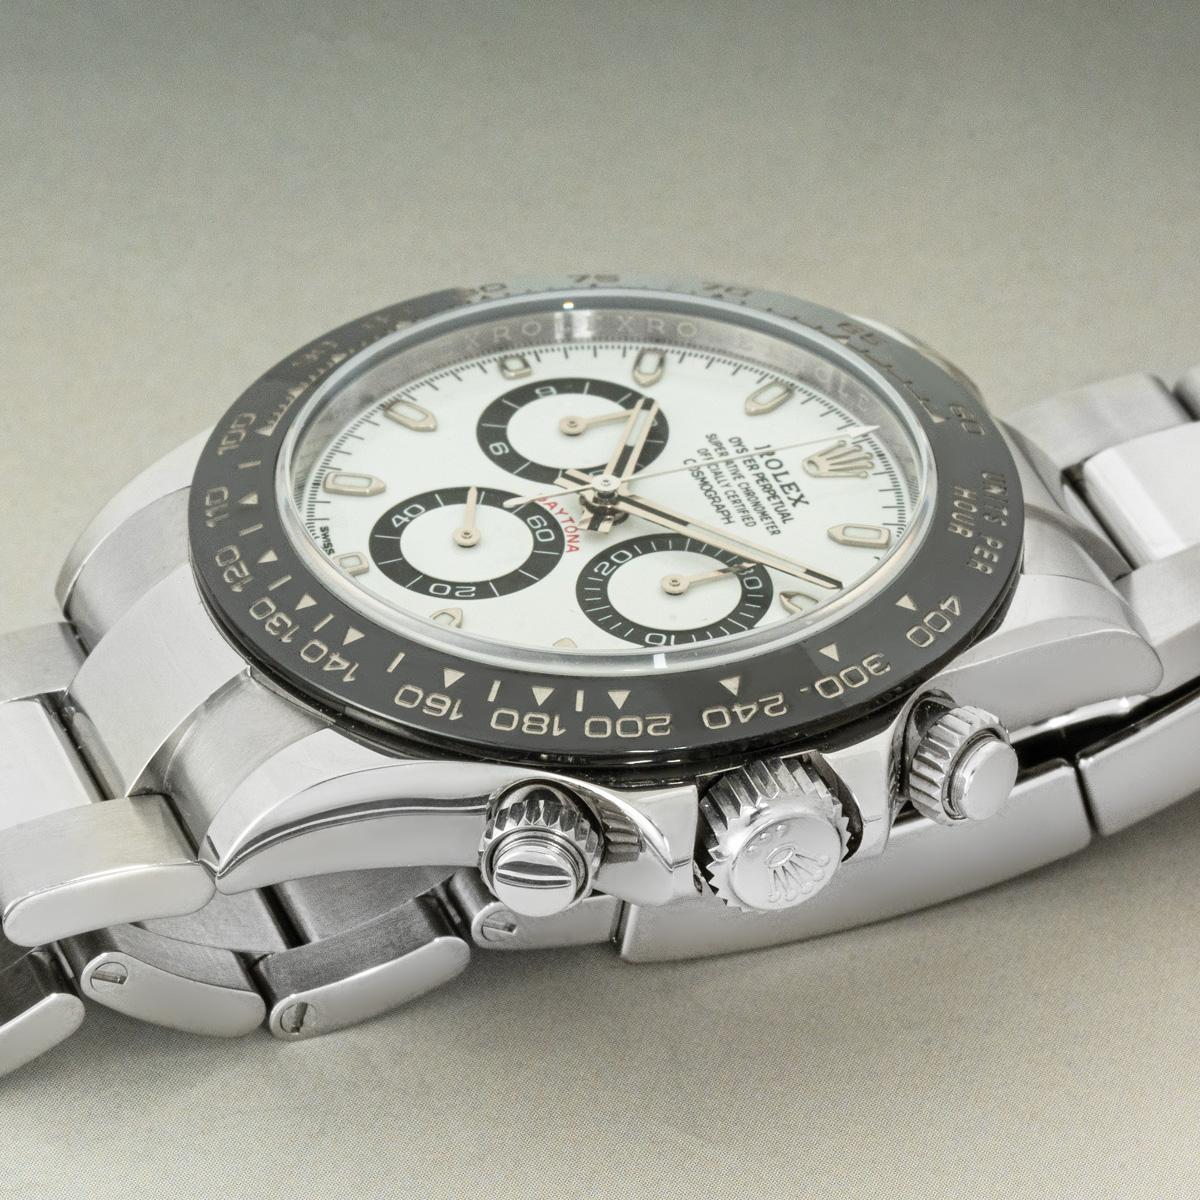 A stainless steel Daytona from Rolex with a highly desirable white dial. Featuring a black ceramic bezel with a tachymetric scale, three counters and pushers, the Daytona is the ultimate timing tool for endurance racing drivers.

The Oyster bracelet